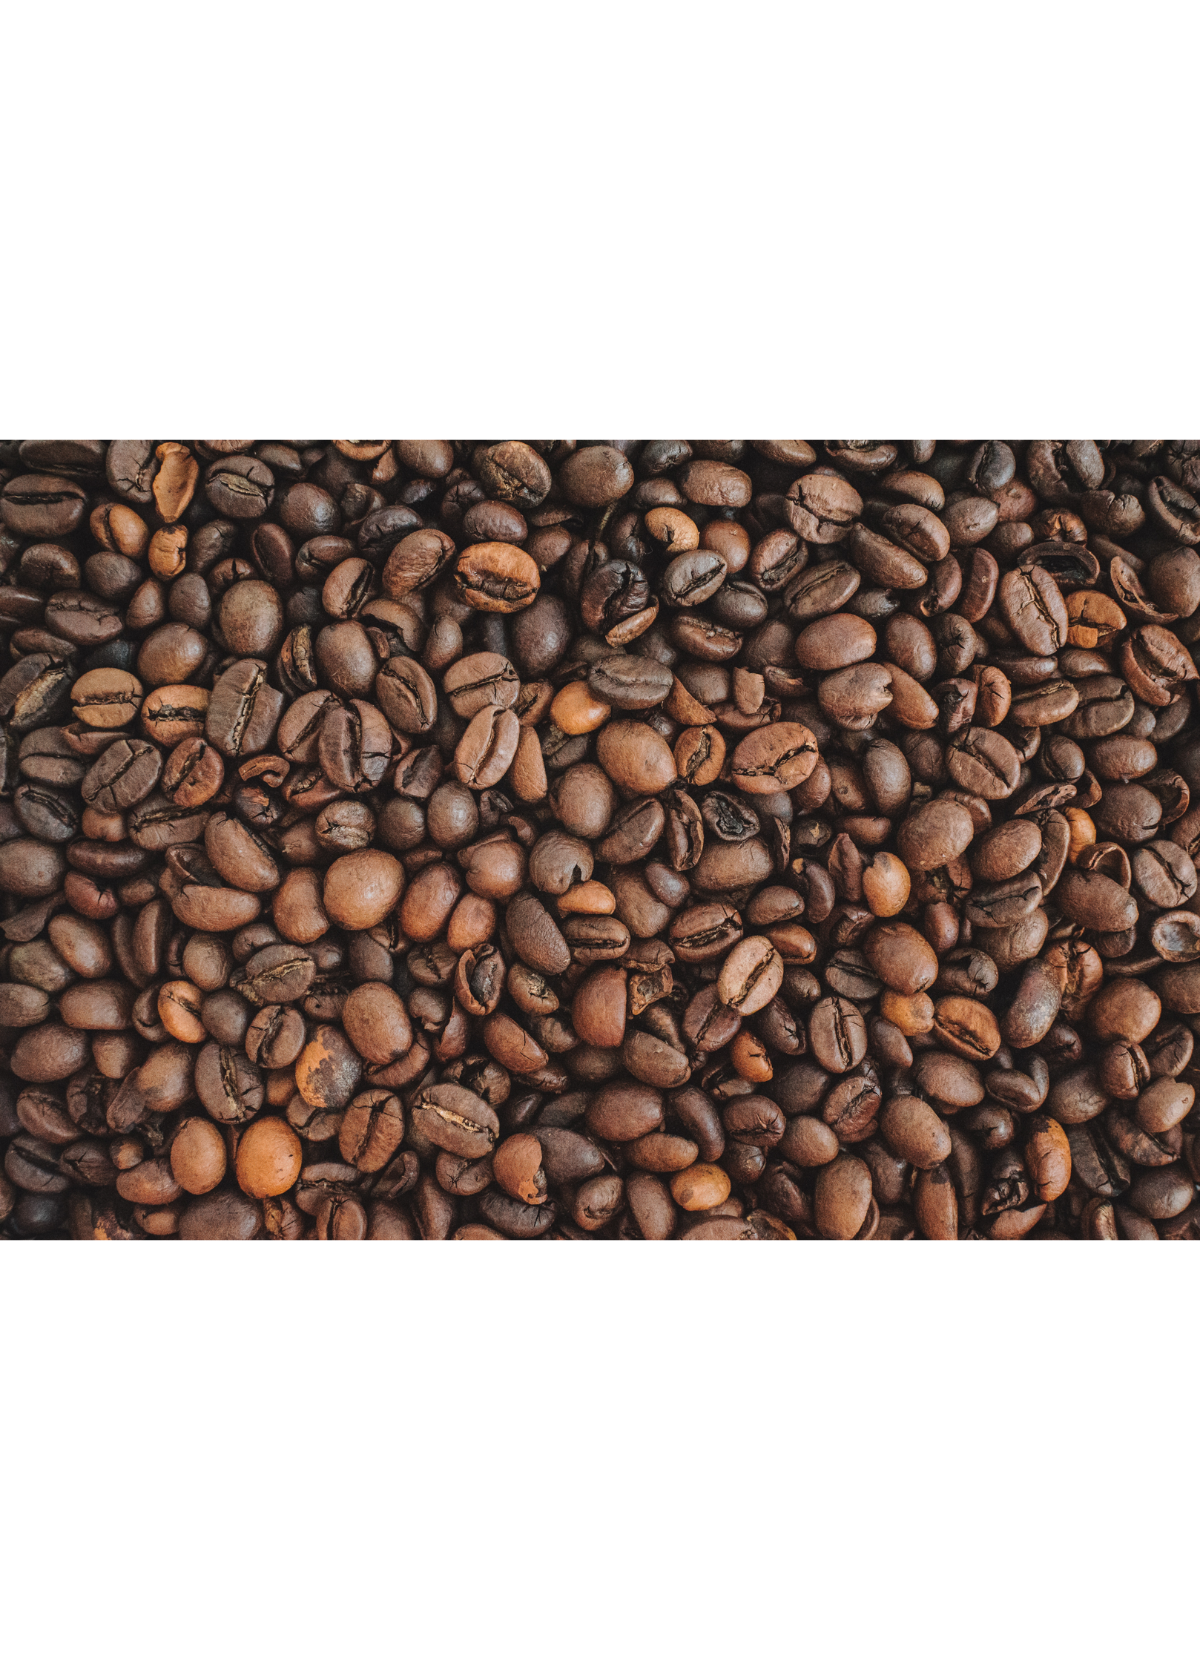 Bean There, Done That: The 5 Best Coffee Beans You Must Try!